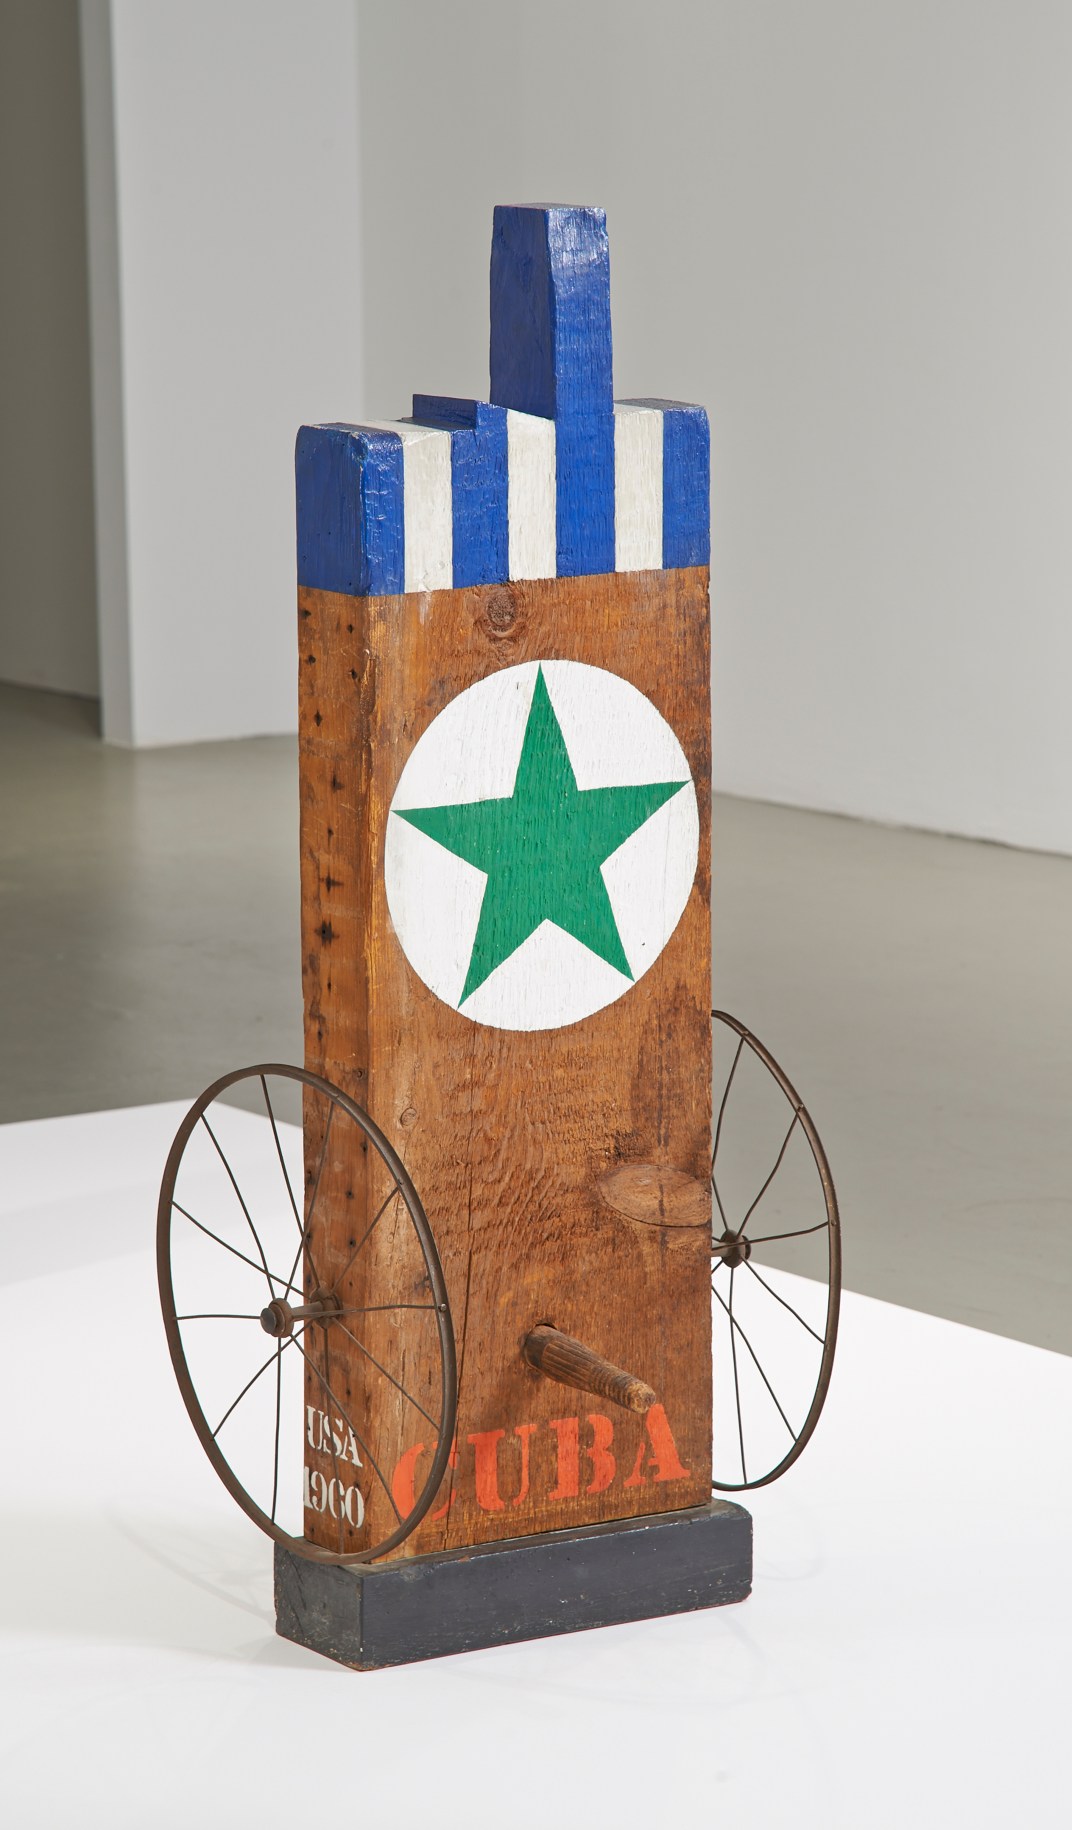 Cuba is a 44 3/8 by 14 1/8 by 5 3/4 inch sculpture consisting of a wooden beam with a haunched tenon, standing on a wooden base. The work's title, Cuba, is painted in red letters across the bottom of the plank. Above it is a wooden peg, and to each side is an iron wheel. A green star in a white circle is found in the upper half of the sculpture, and above this the top part of the sculpture, including the tenon, is painted in blue and white vertical stripes.